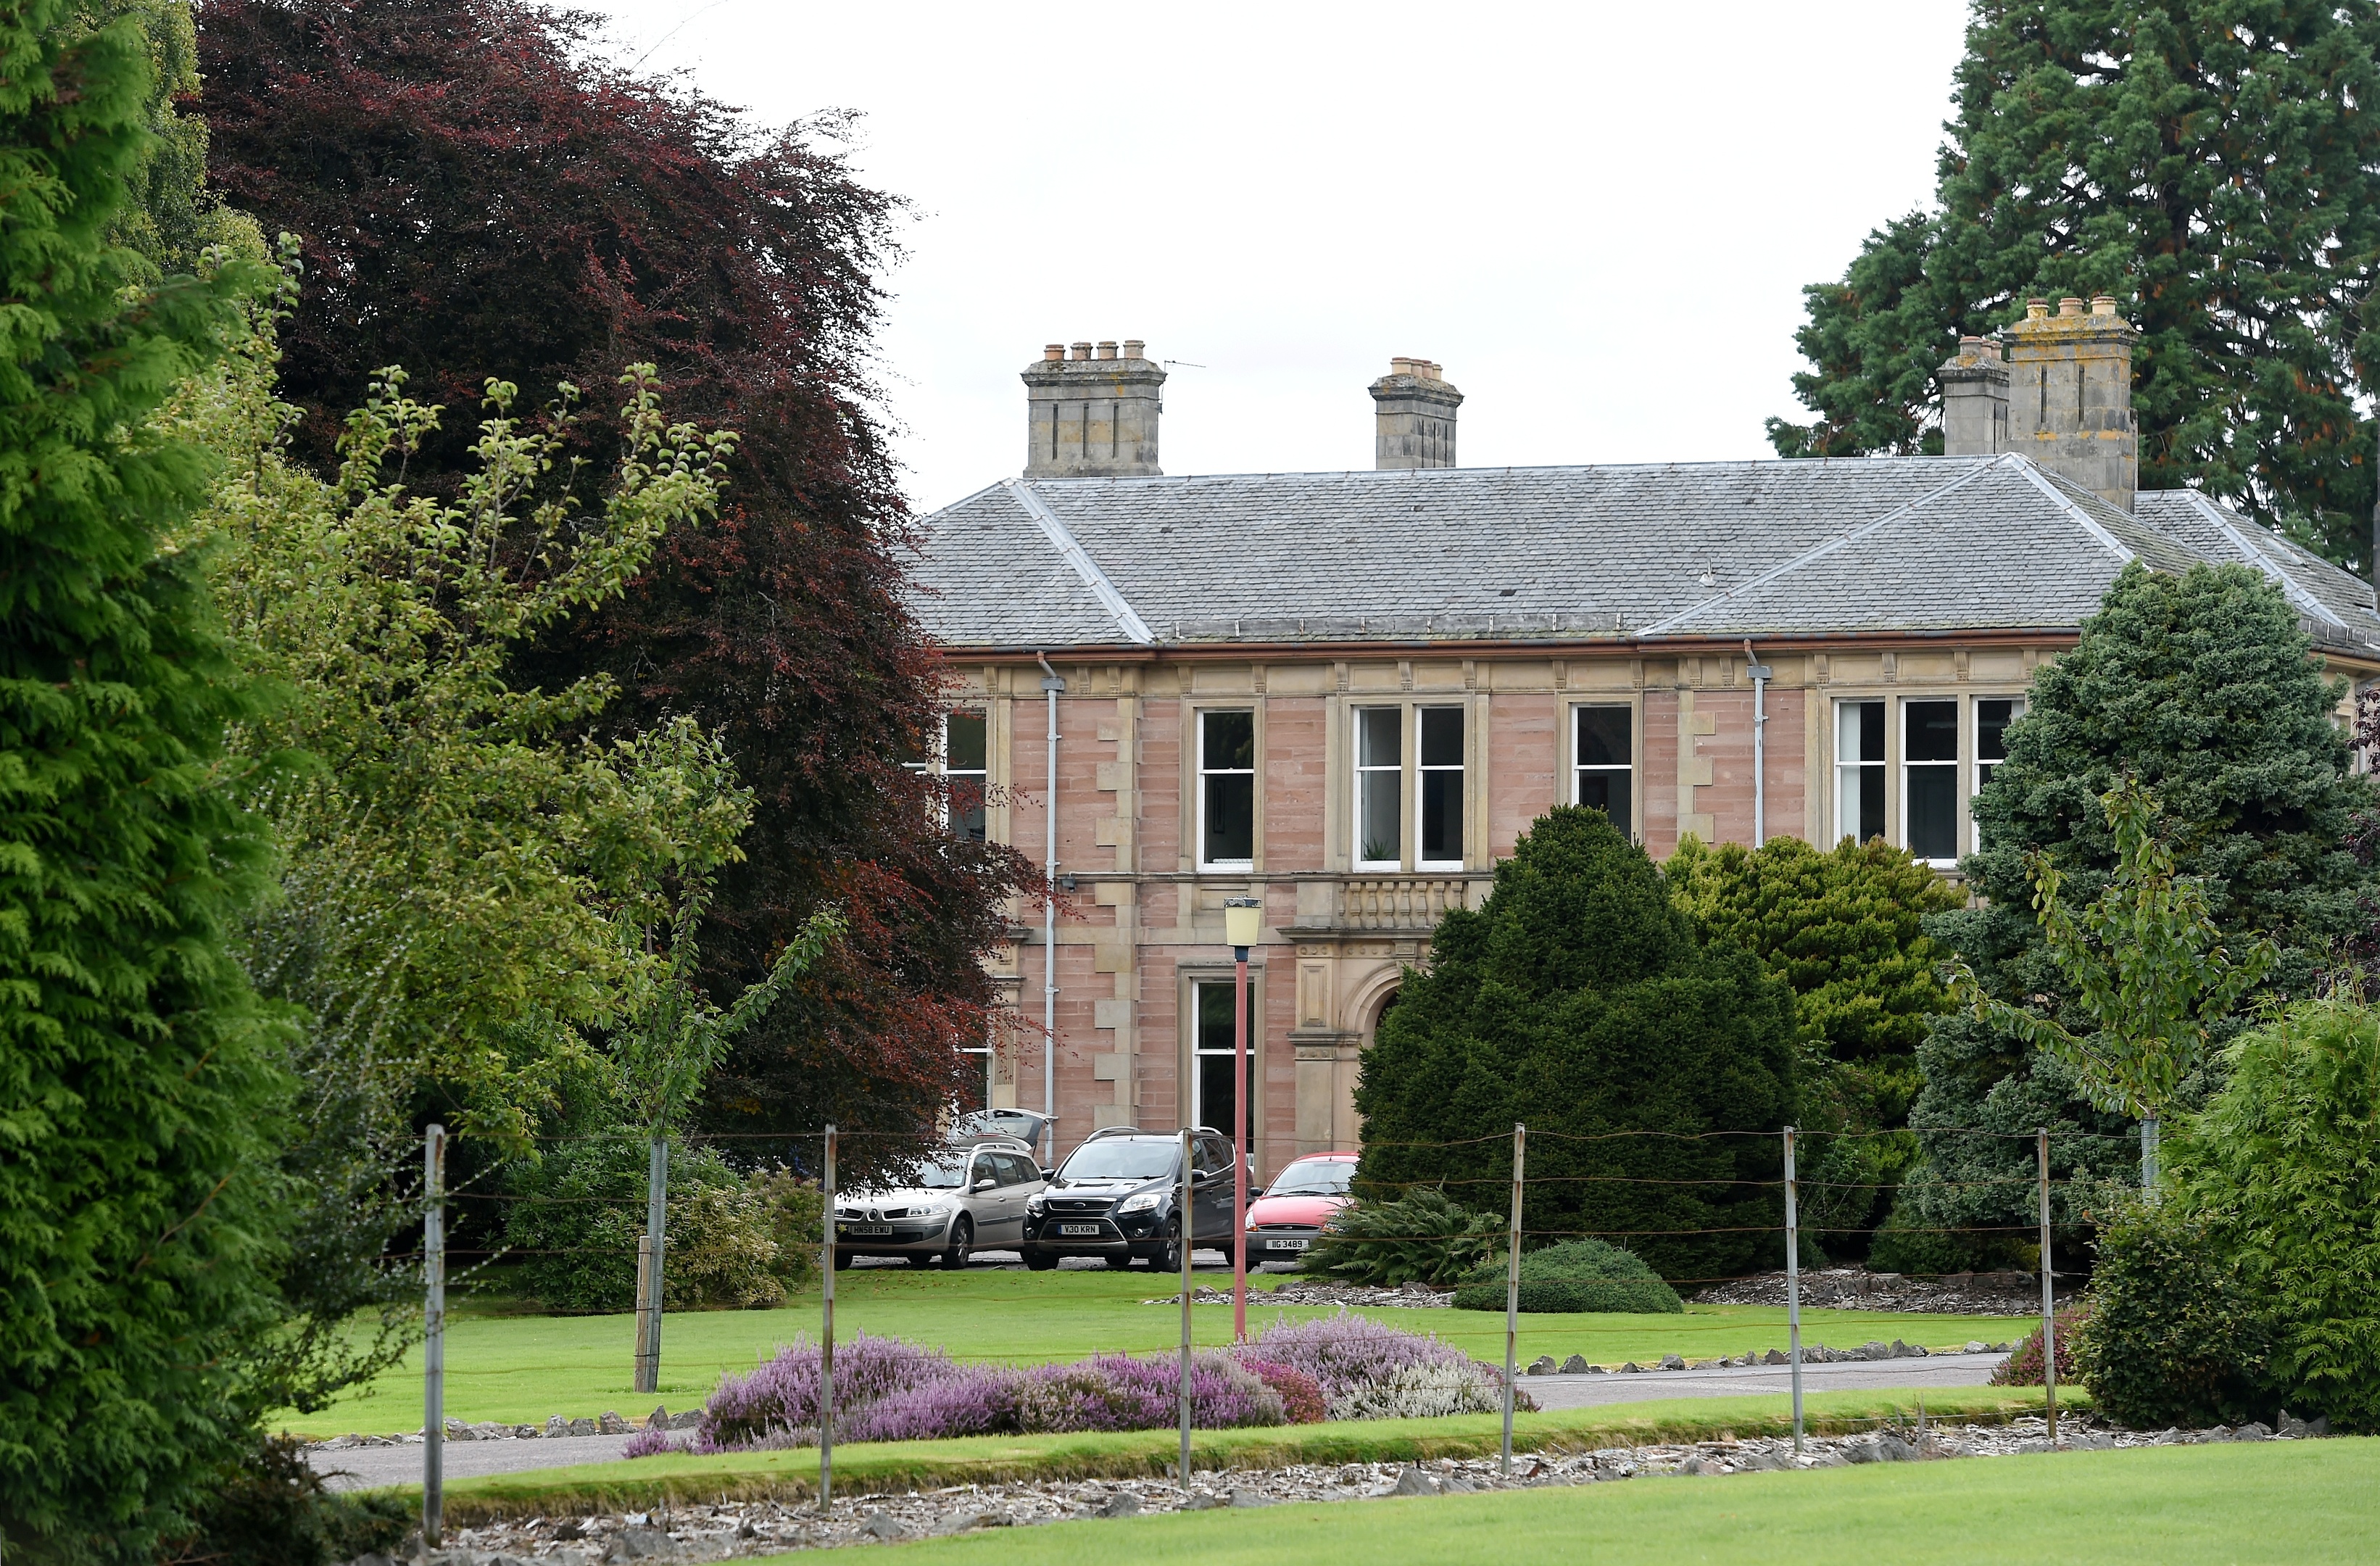 The Scottish Agricultural College in Inverness.
Picture by Sandy McCook